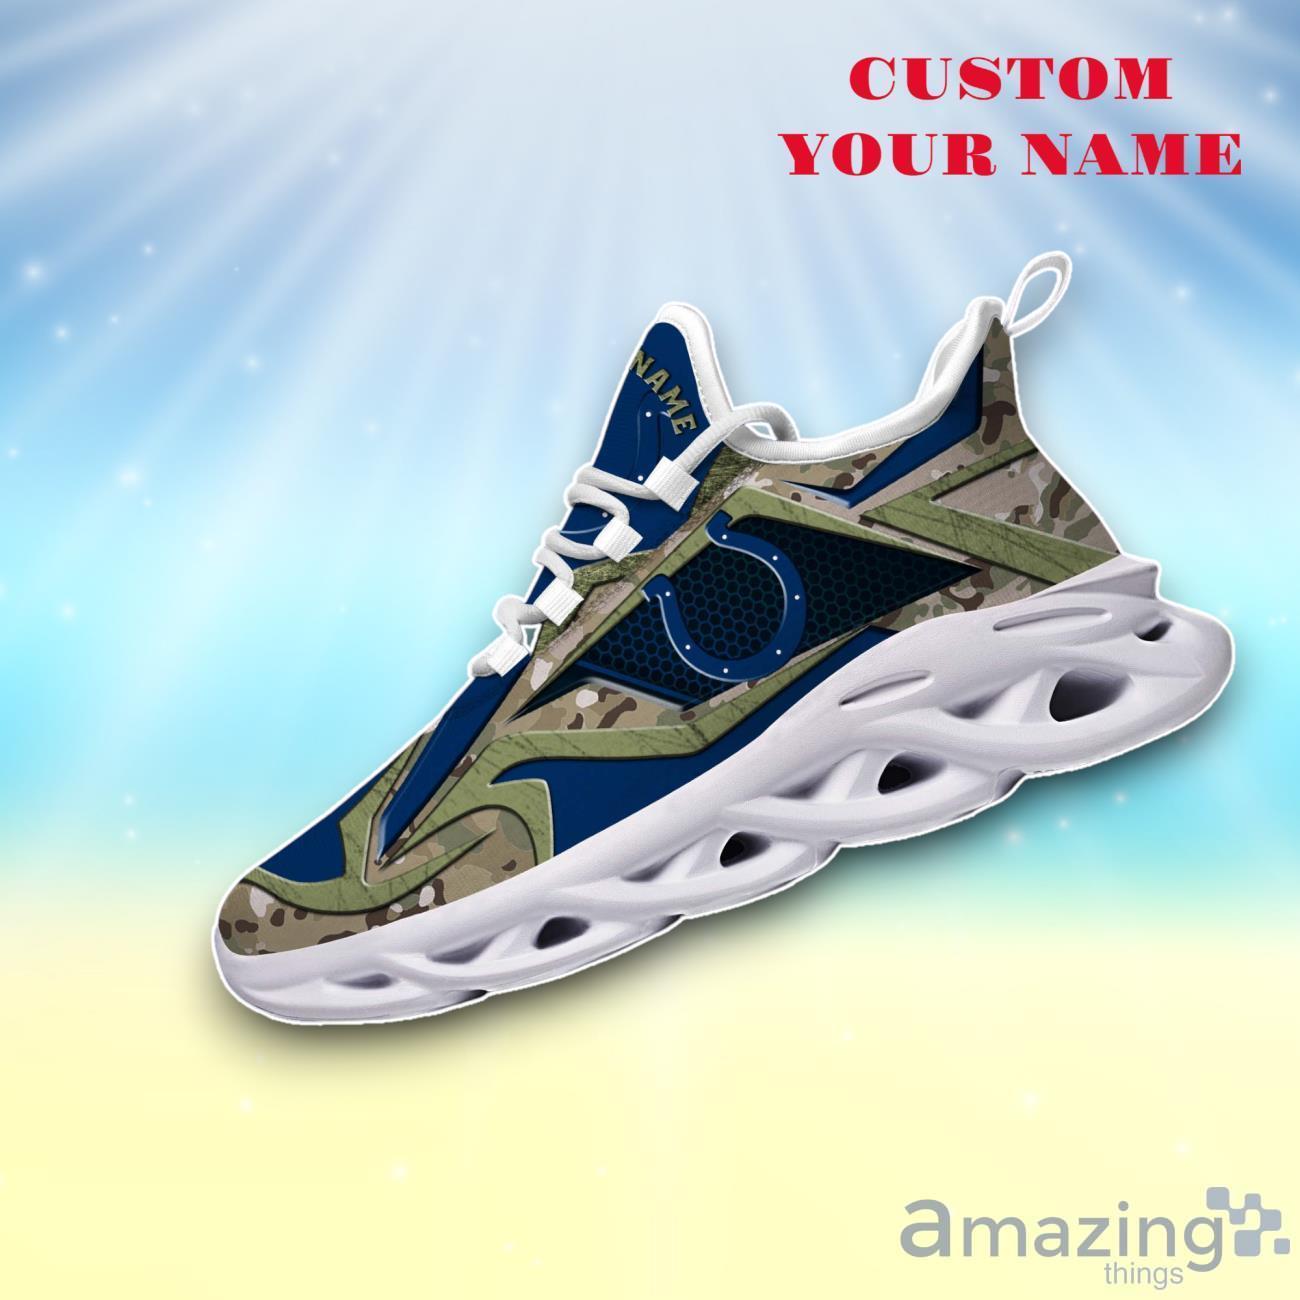 Indianapolis Colts Camouflage C Max Soul Shoes Custom Name Exclusive Sneakers For Fans Product Photo 1